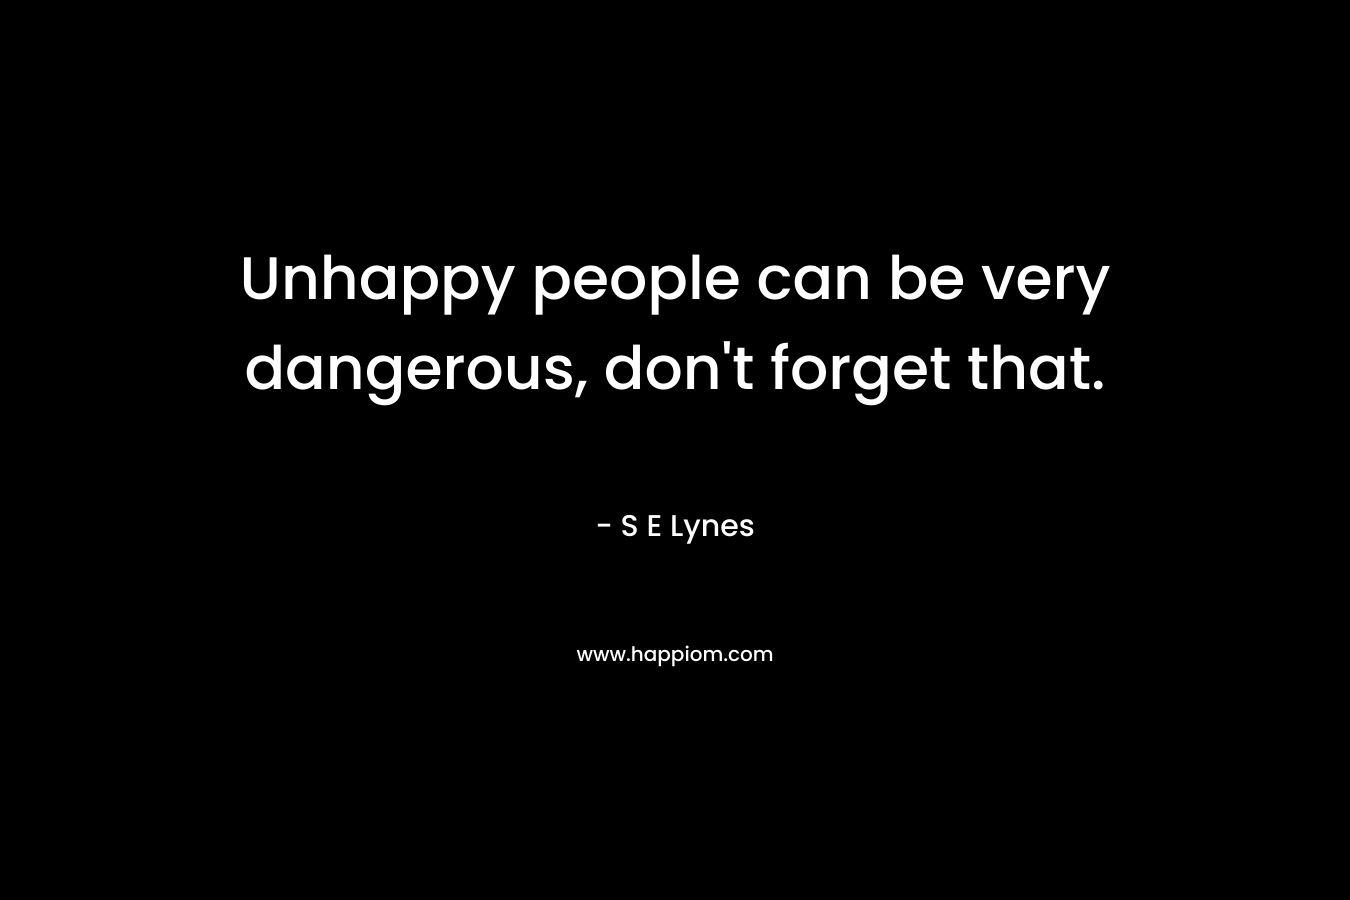 Unhappy people can be very dangerous, don’t forget that. – S E Lynes